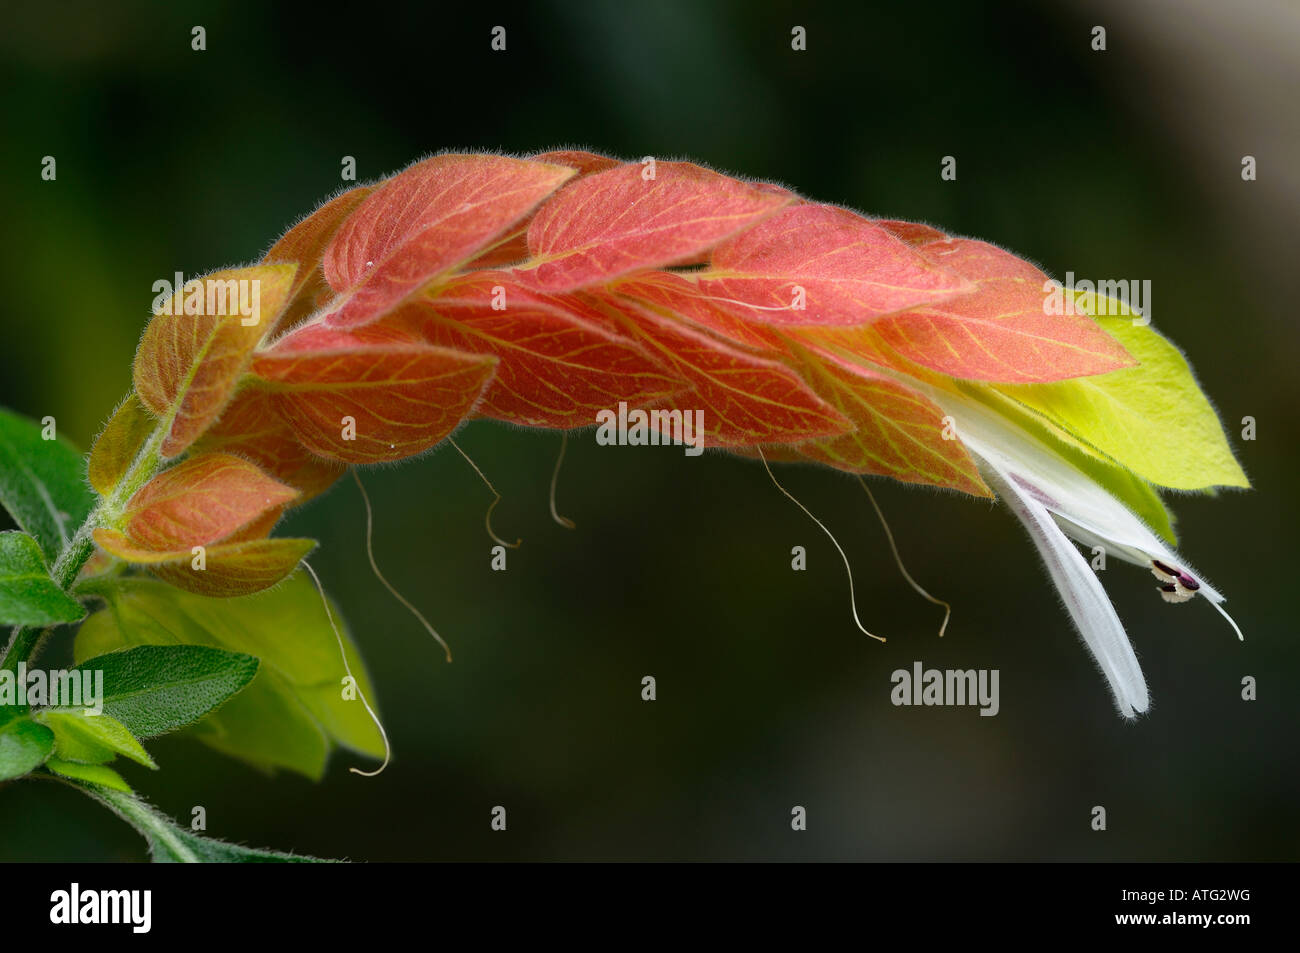 White hairy flowers on a tropical Shrimp Plant with salmon colored bracts Stock Photo